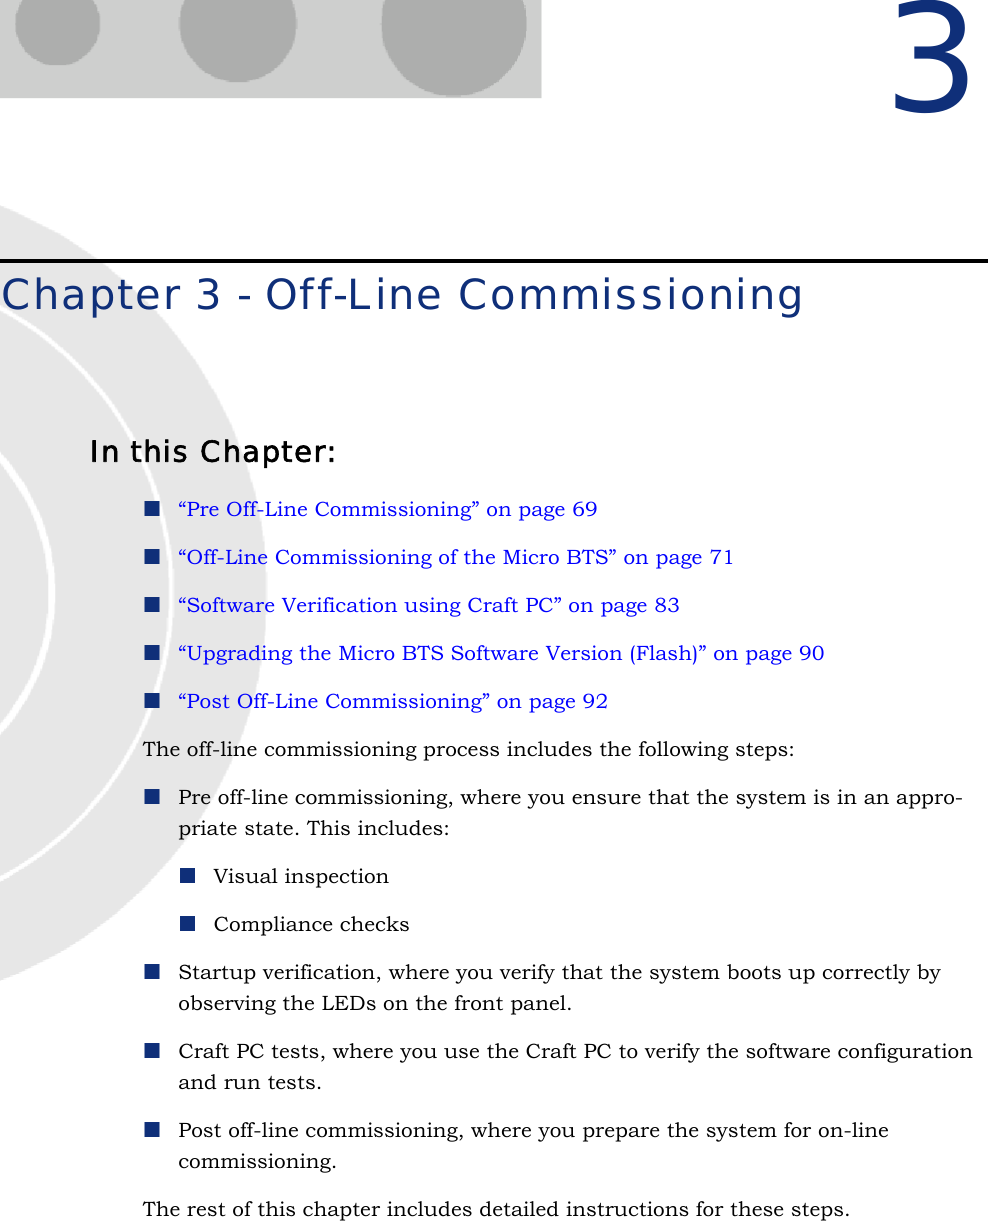 3Chapter 3 - Off-Line CommissioningIn this Chapter:“Pre Off-Line Commissioning” on page 69“Off-Line Commissioning of the Micro BTS” on page 71“Software Verification using Craft PC” on page 83“Upgrading the Micro BTS Software Version (Flash)” on page 90“Post Off-Line Commissioning” on page 92The off-line commissioning process includes the following steps:Pre off-line commissioning, where you ensure that the system is in an appro-priate state. This includes:Visual inspection Compliance checksStartup verification, where you verify that the system boots up correctly by observing the LEDs on the front panel.Craft PC tests, where you use the Craft PC to verify the software configuration and run tests.Post off-line commissioning, where you prepare the system for on-line commissioning.The rest of this chapter includes detailed instructions for these steps.